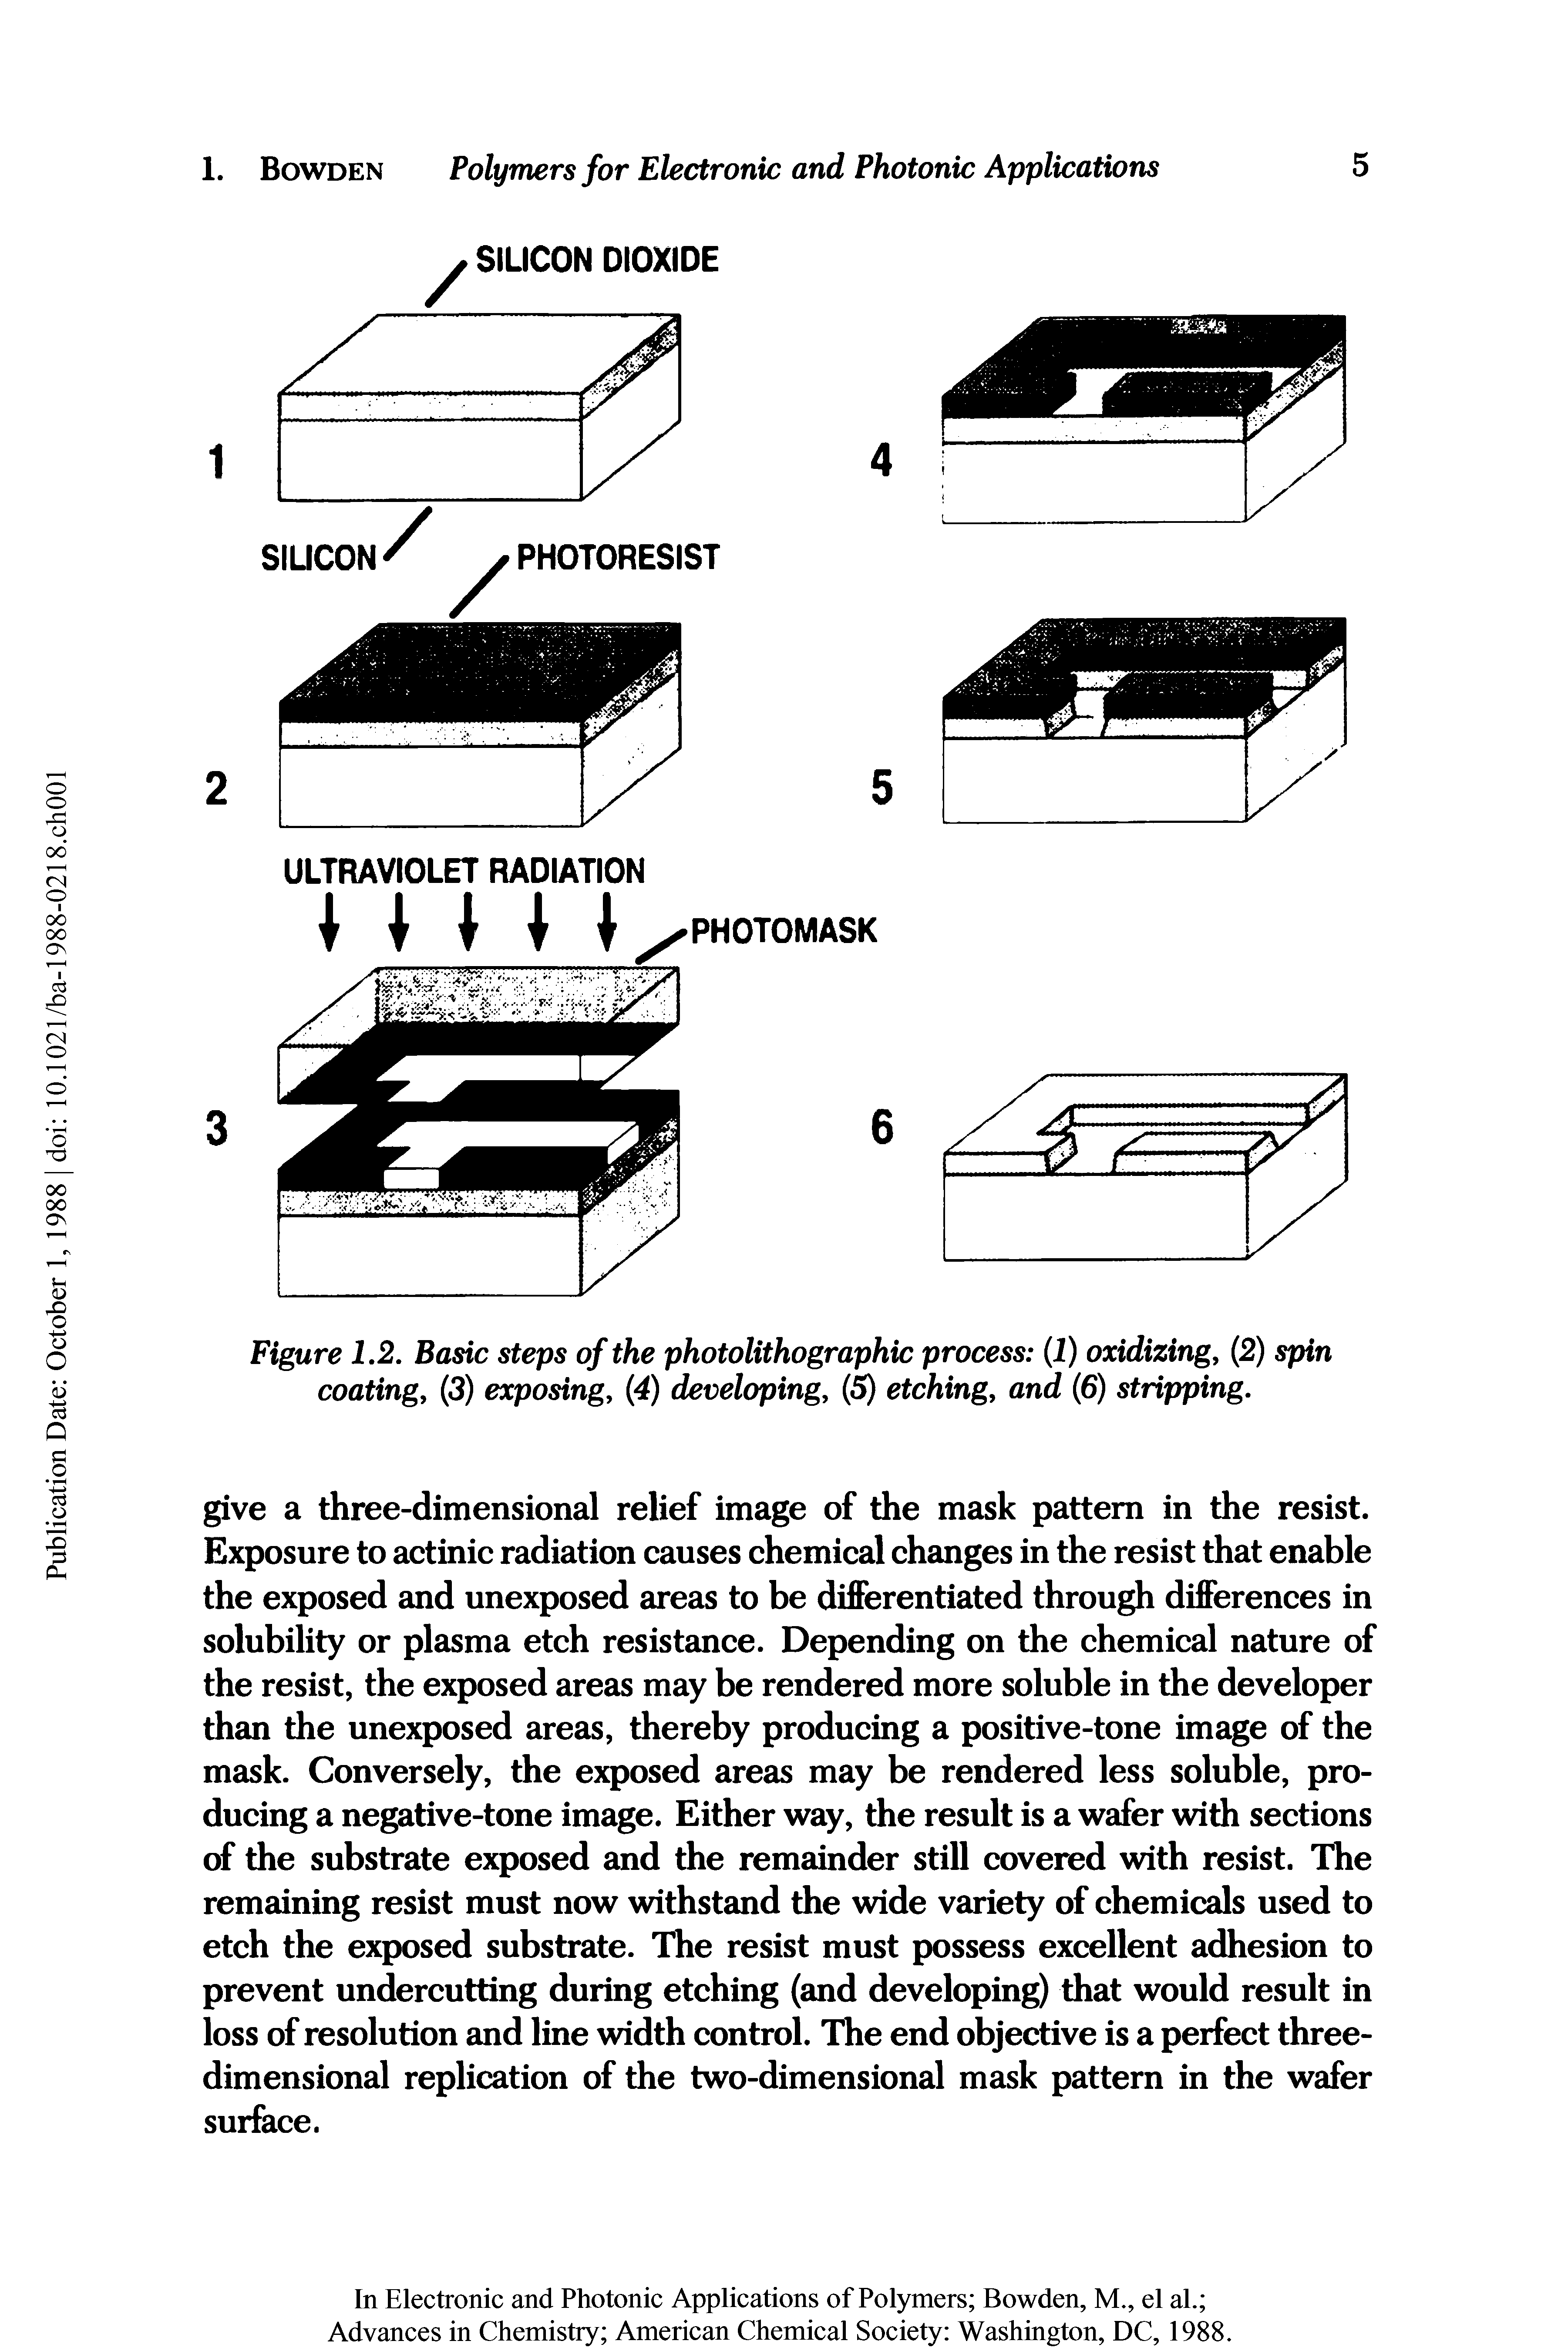 Figure 1.2. Basic steps of the photolithographic process (J) oxidizing, (2) spin coating, (3) exposing, 4) developing, etching, and (6) stripping.